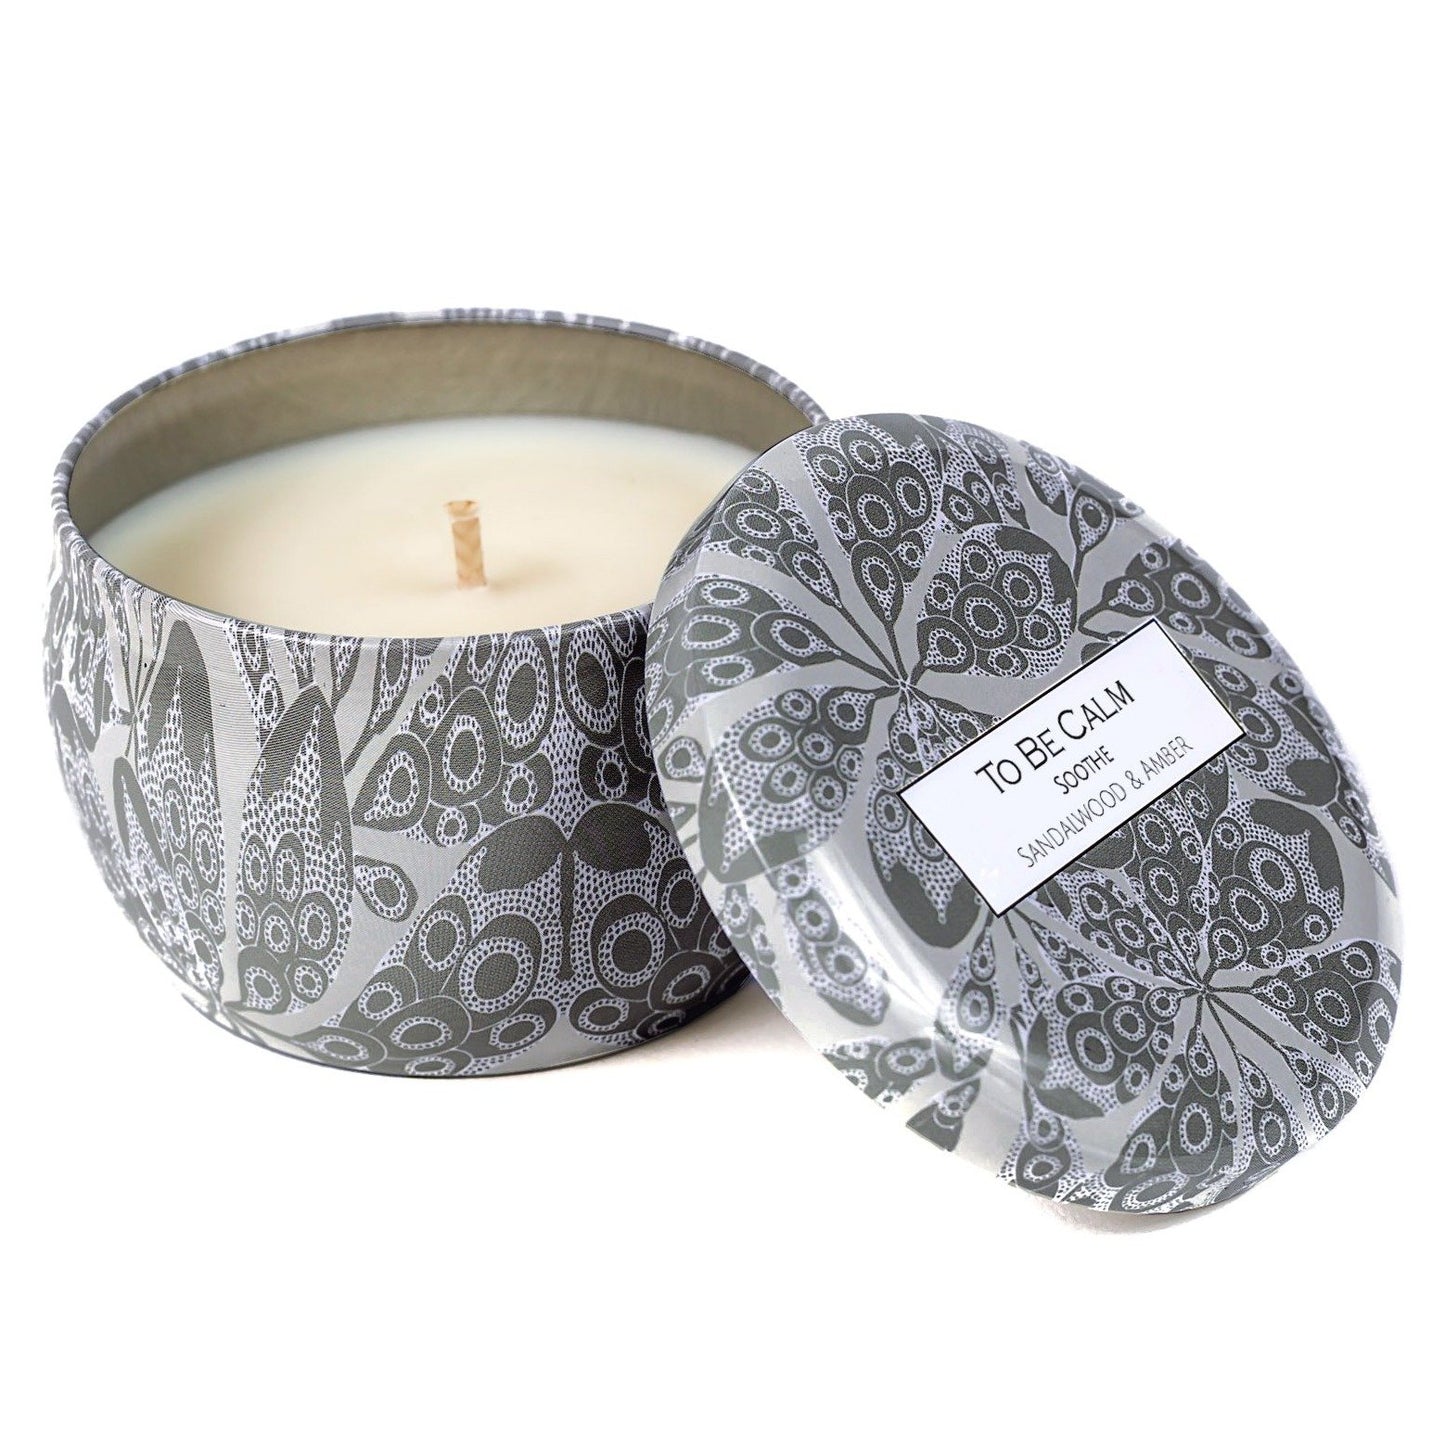 Soothe - Sandalwood & Amber - Mini Soy Candle 120gms